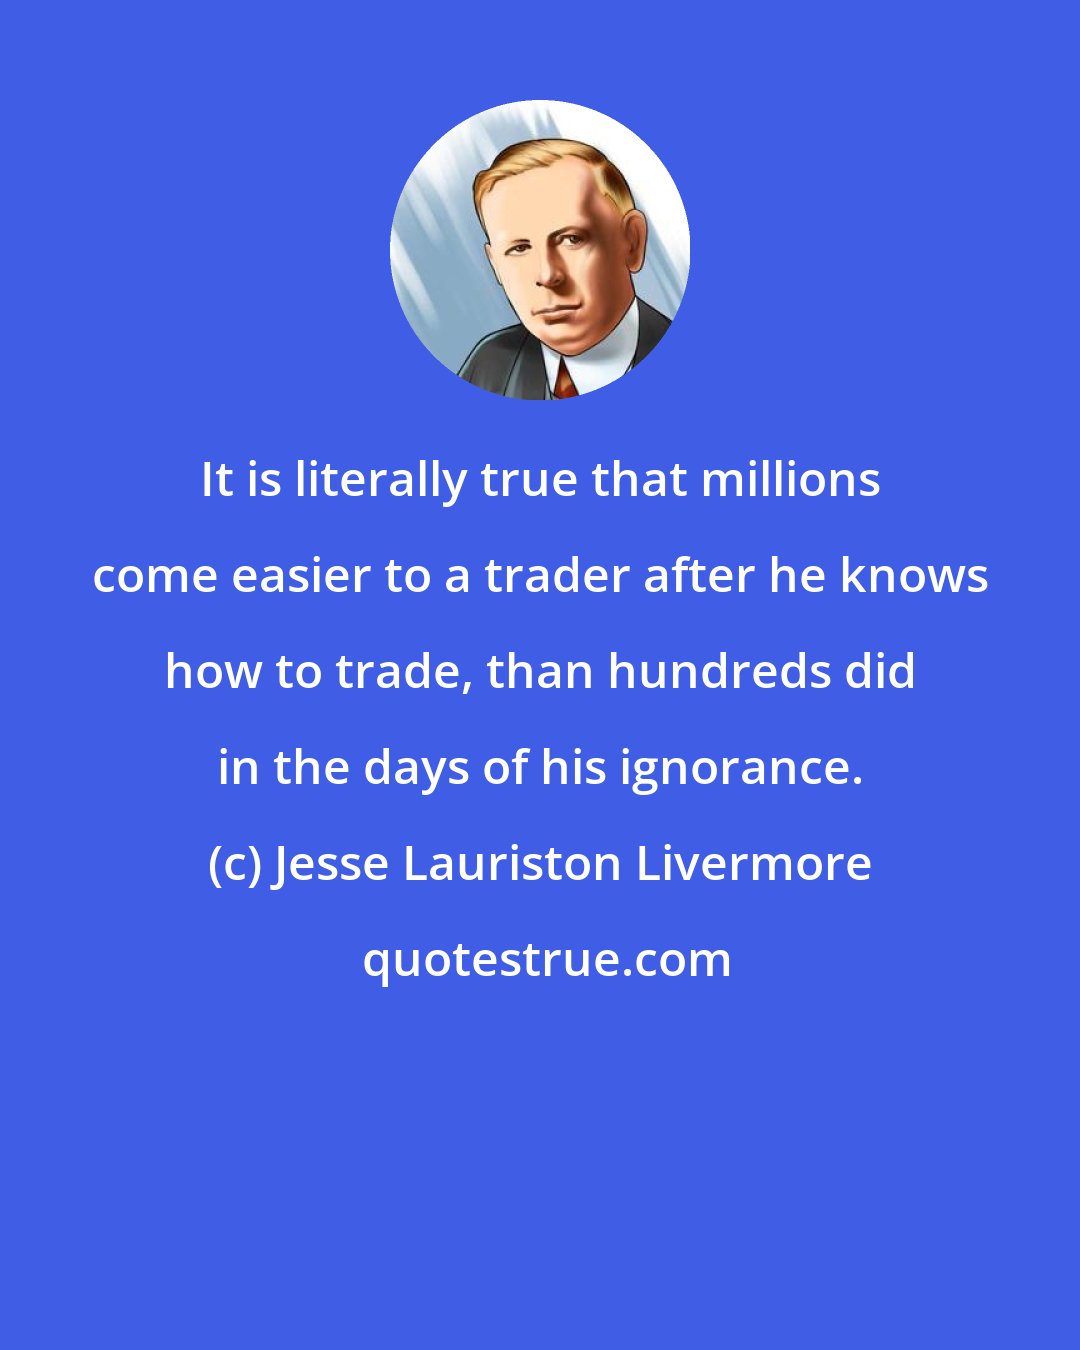 Jesse Lauriston Livermore: It is literally true that millions come easier to a trader after he knows how to trade, than hundreds did in the days of his ignorance.